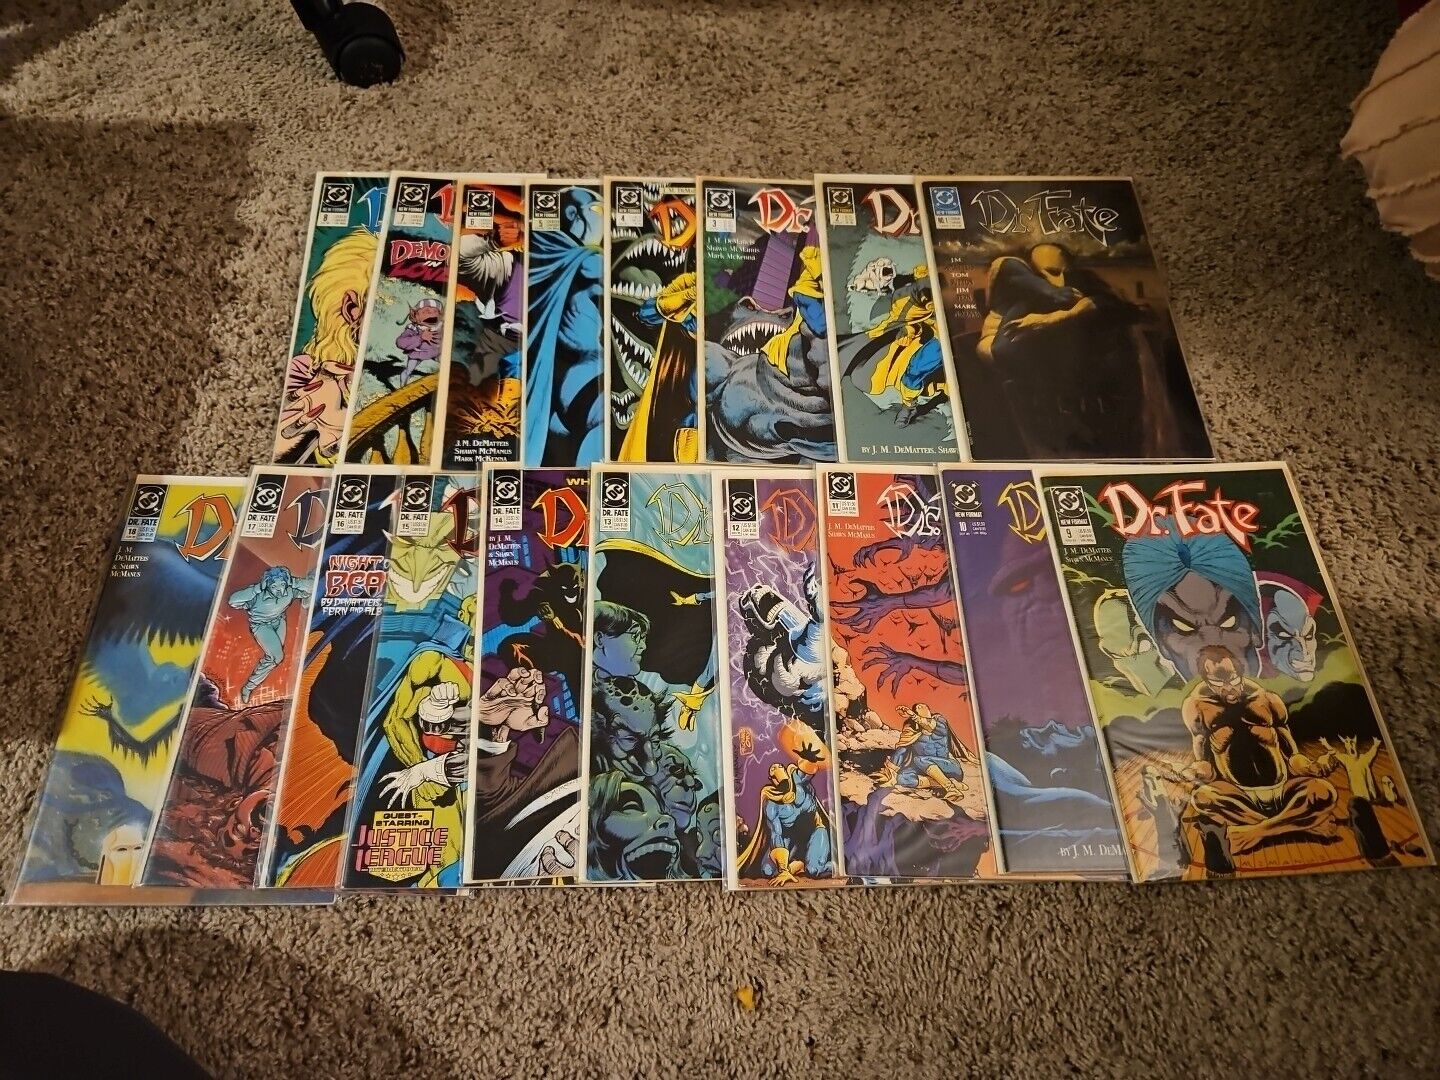 Dr. Fate, #1-18 New, 1989